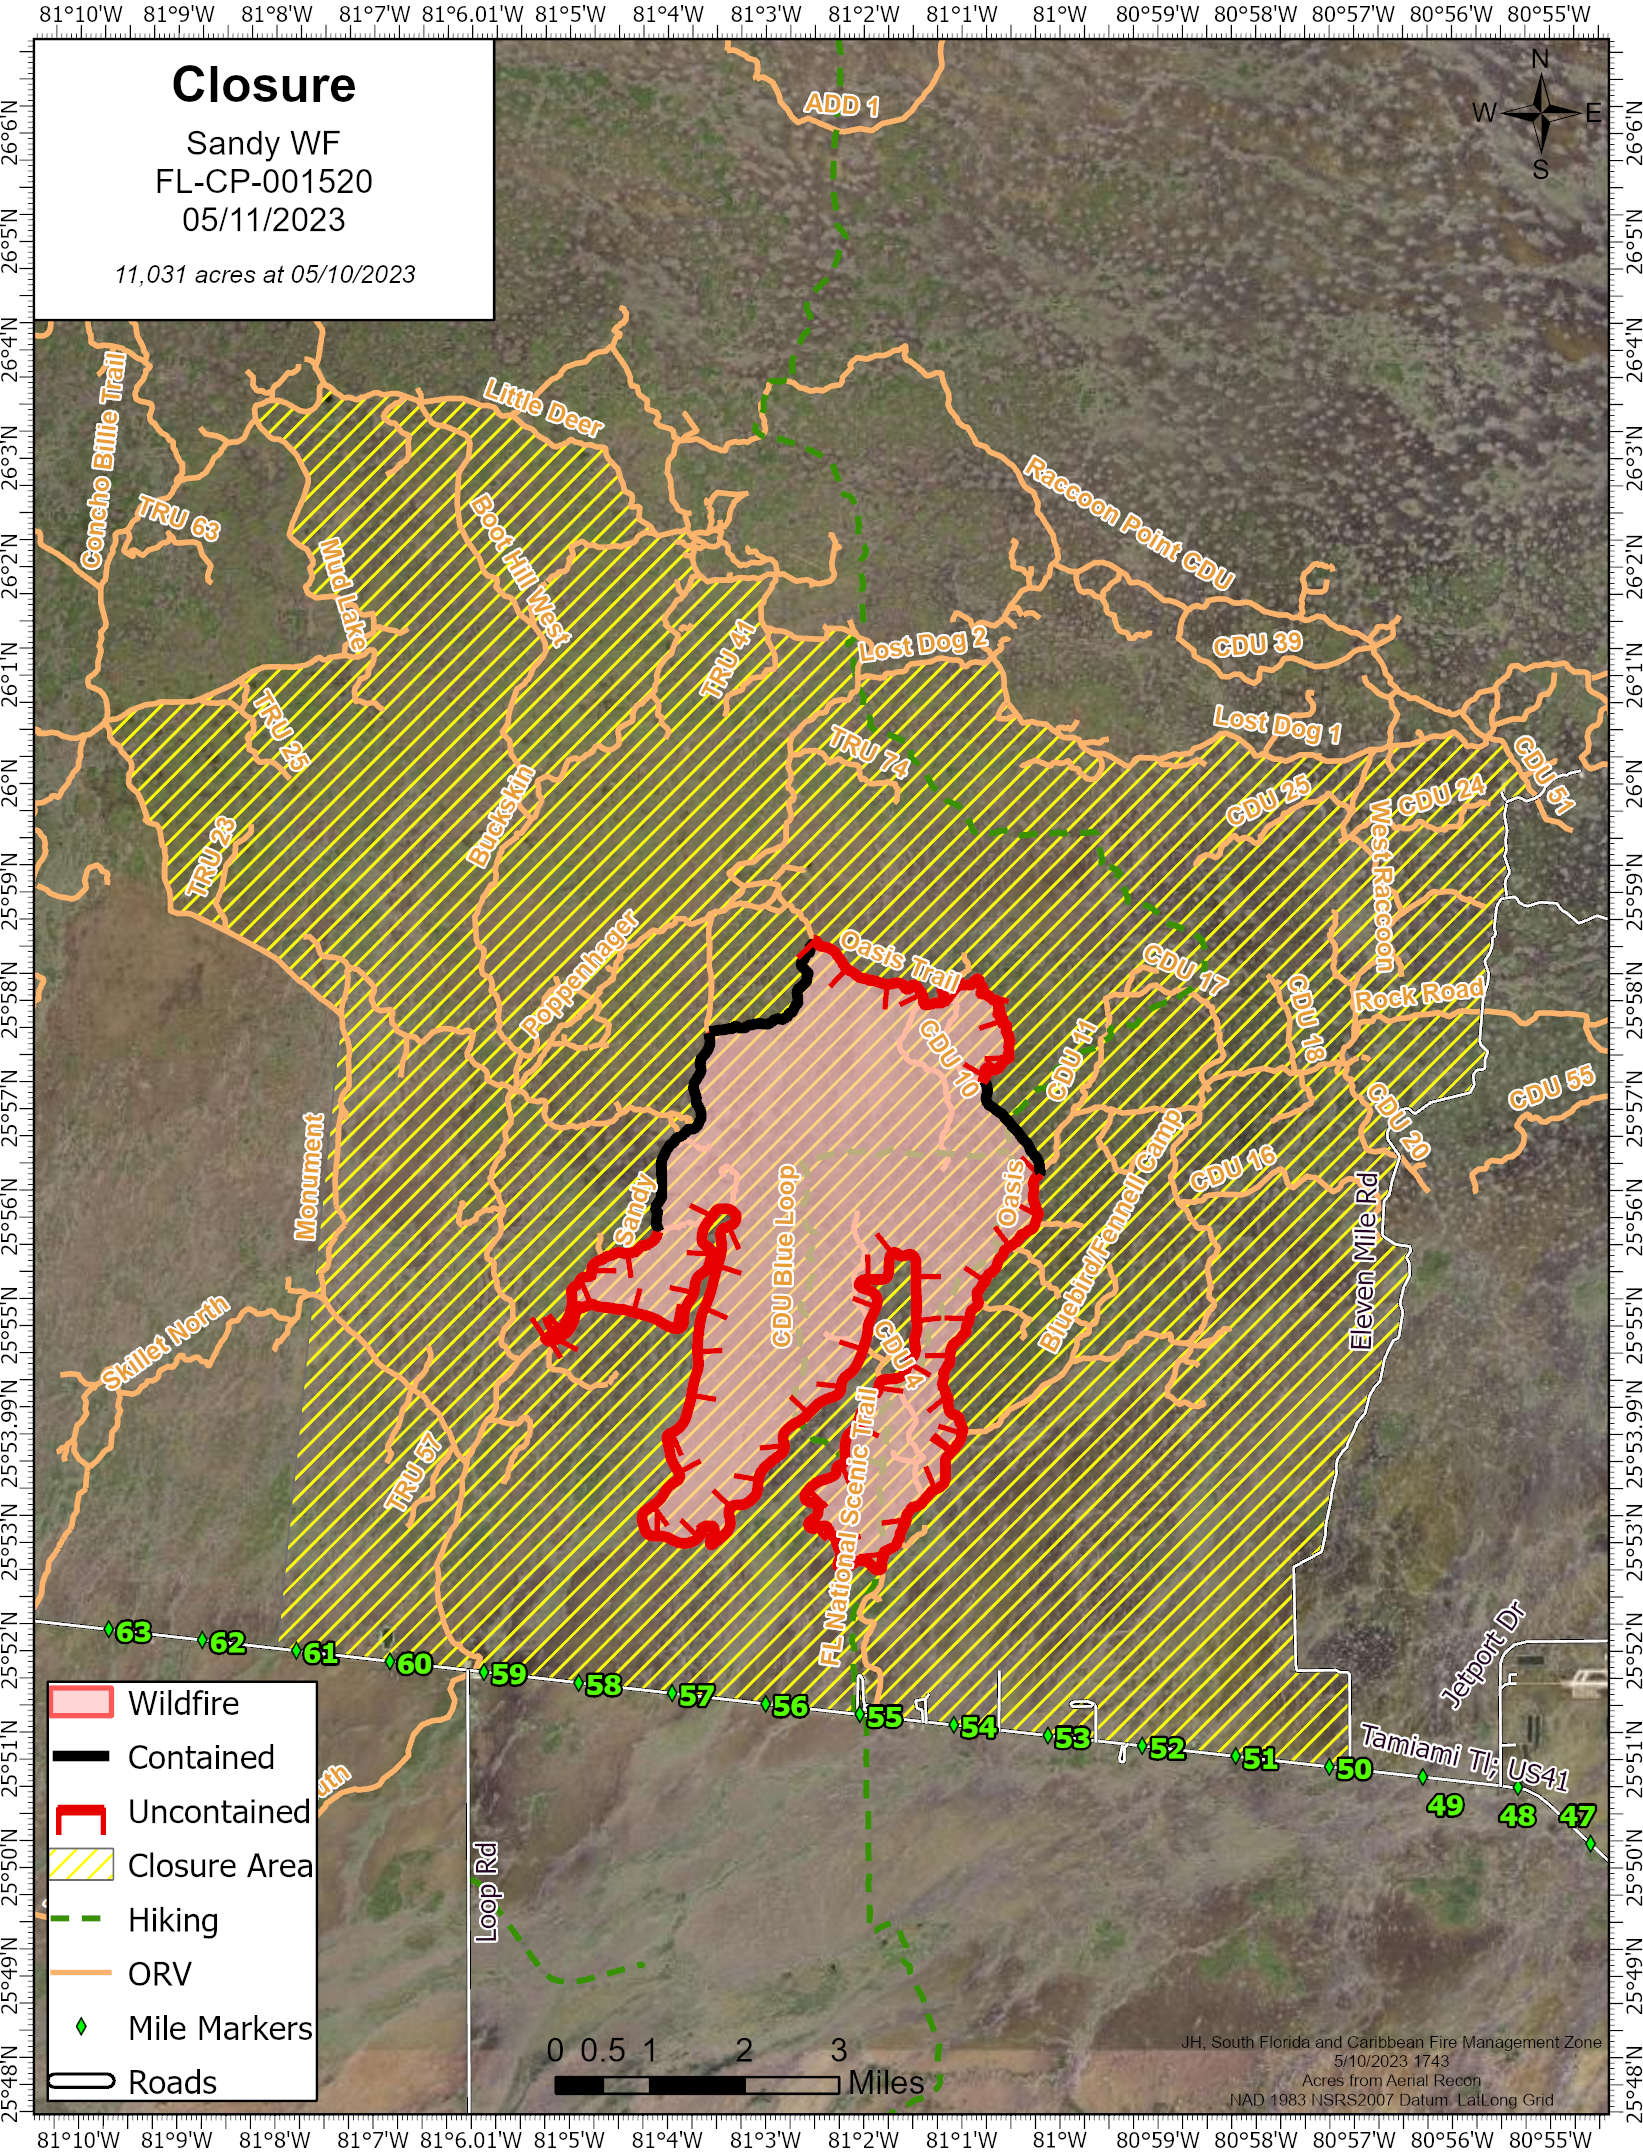 Sandy Fire Perimeter and Closures 05/11